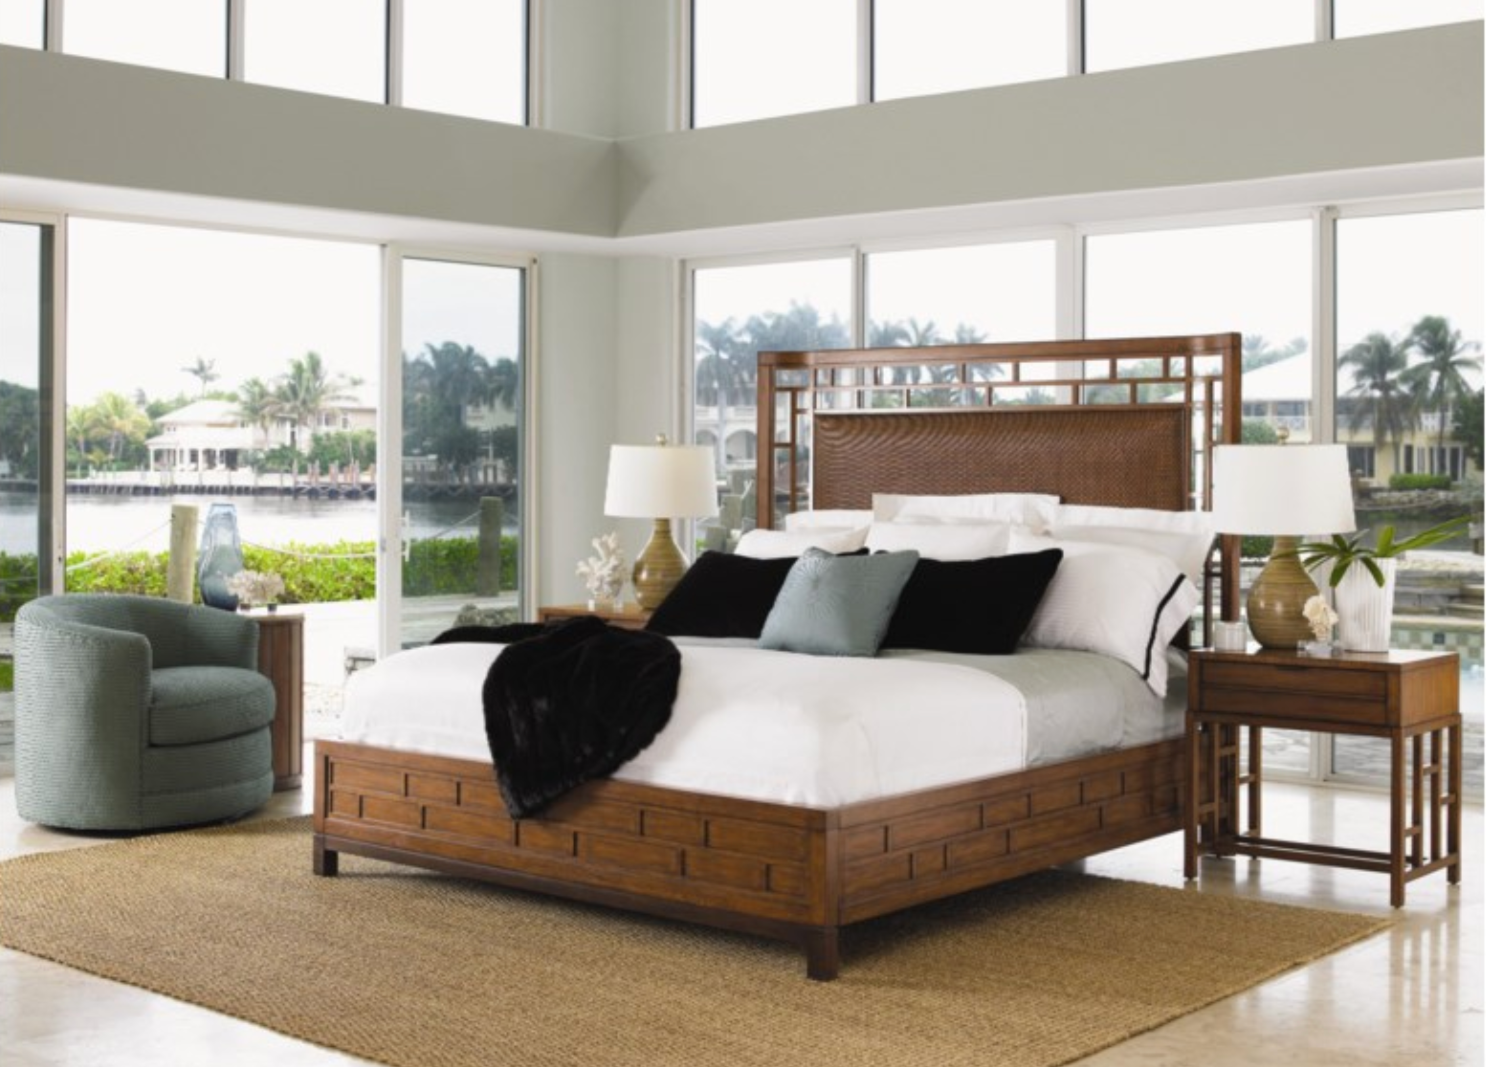 Beautiful room with floor-to-ceiling windows and a king-size rattan bed in the center. 